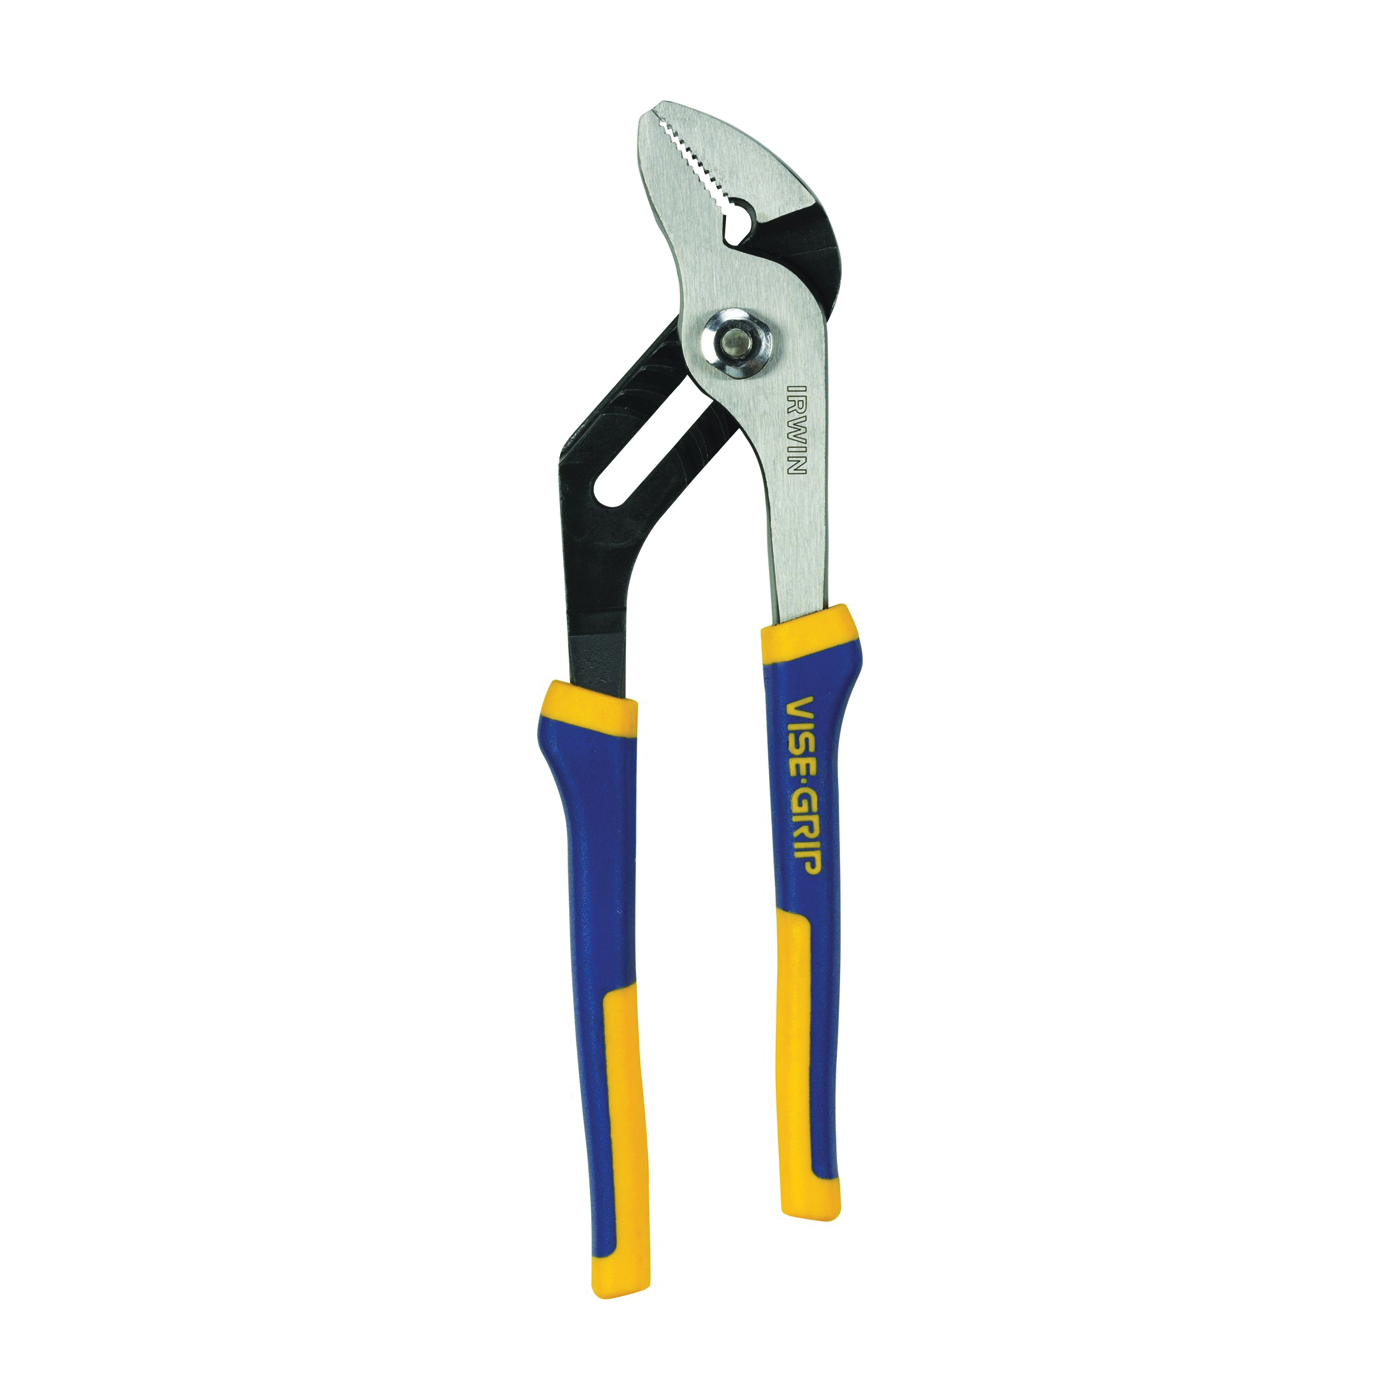 4935321 Groove Joint Plier, 10 in OAL, 2-1/4 in Jaw Opening, Blue/Yellow Handle, Cushion-Grip Handle